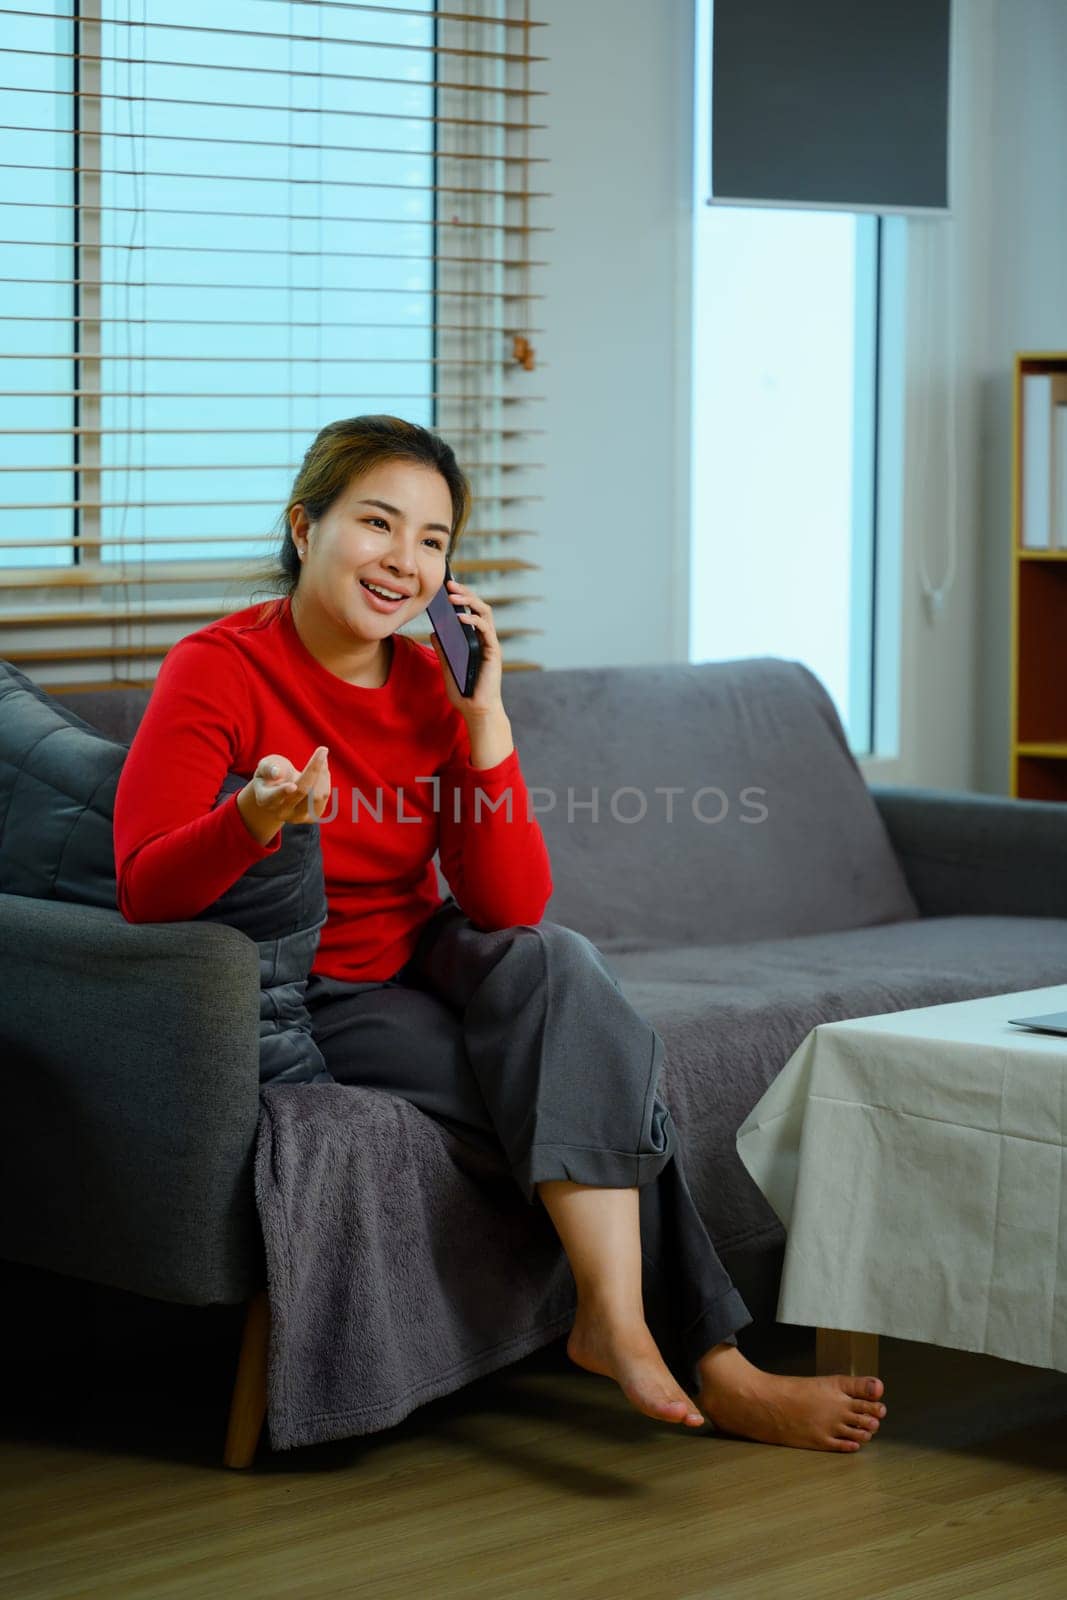 Cheerful young woman having phone conversation sitting on sofa at home.